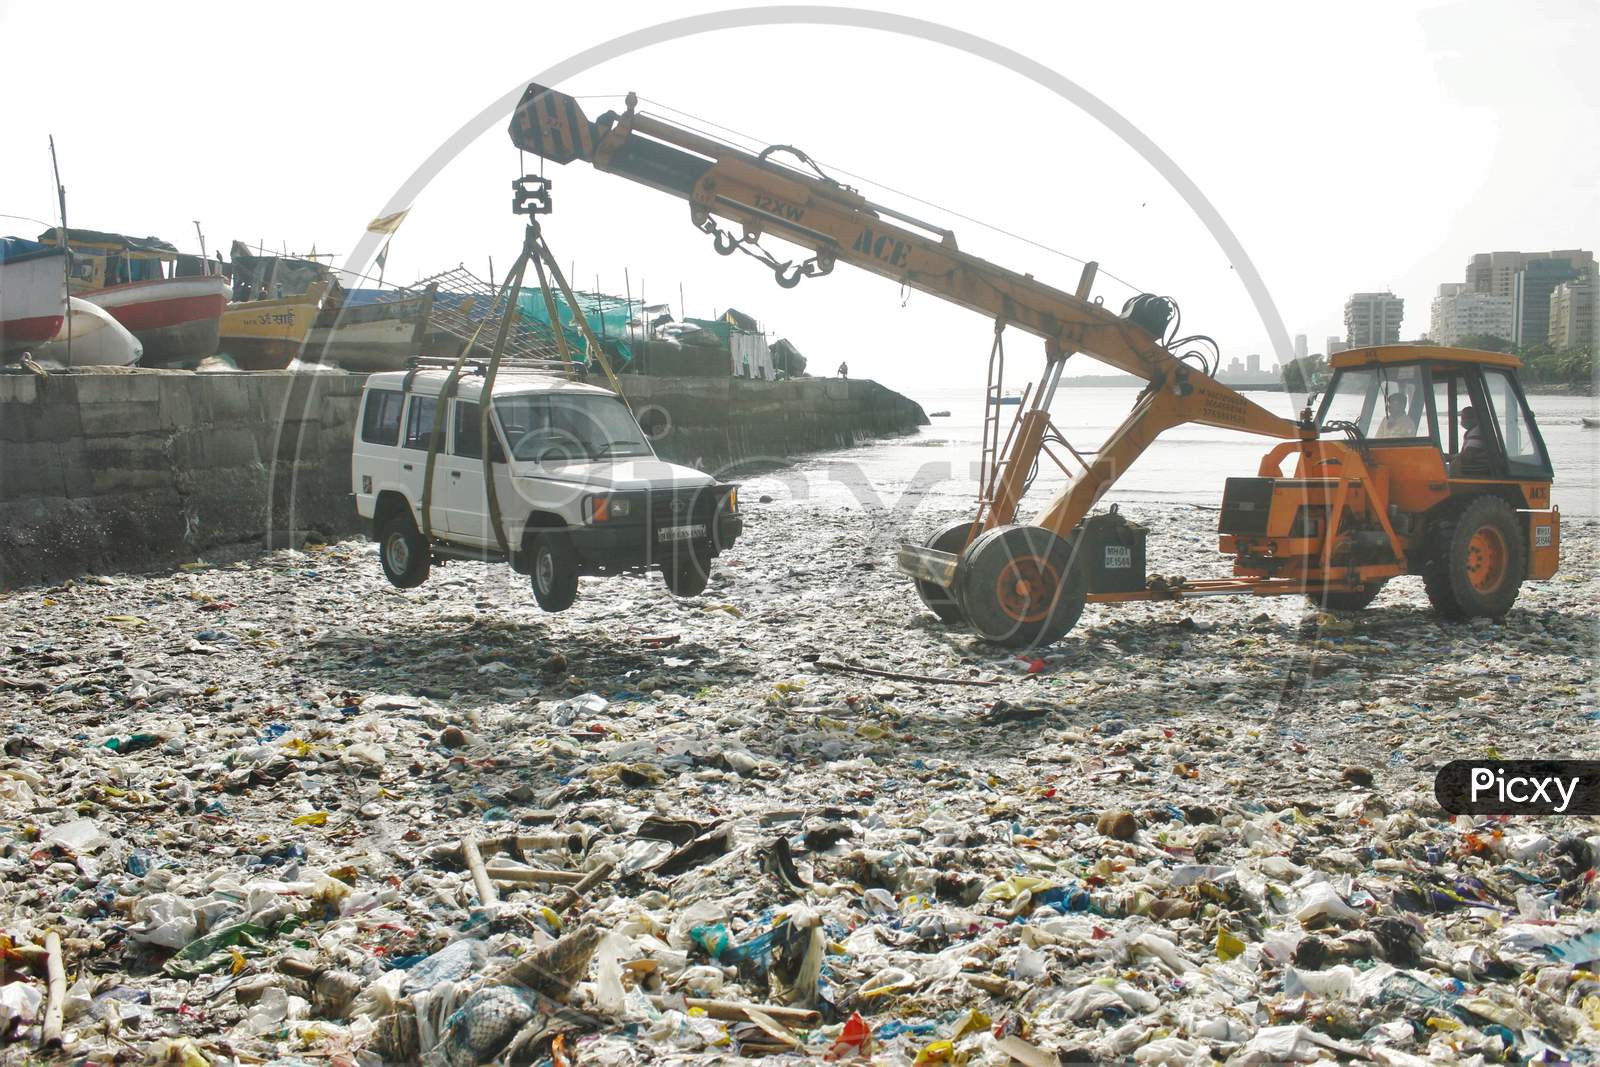 A car parked in between the boats, is being lifted by a crane from a dock and taken to the road via the beach covered with plastic waste, in Mumbai, India on June 5, 2020.